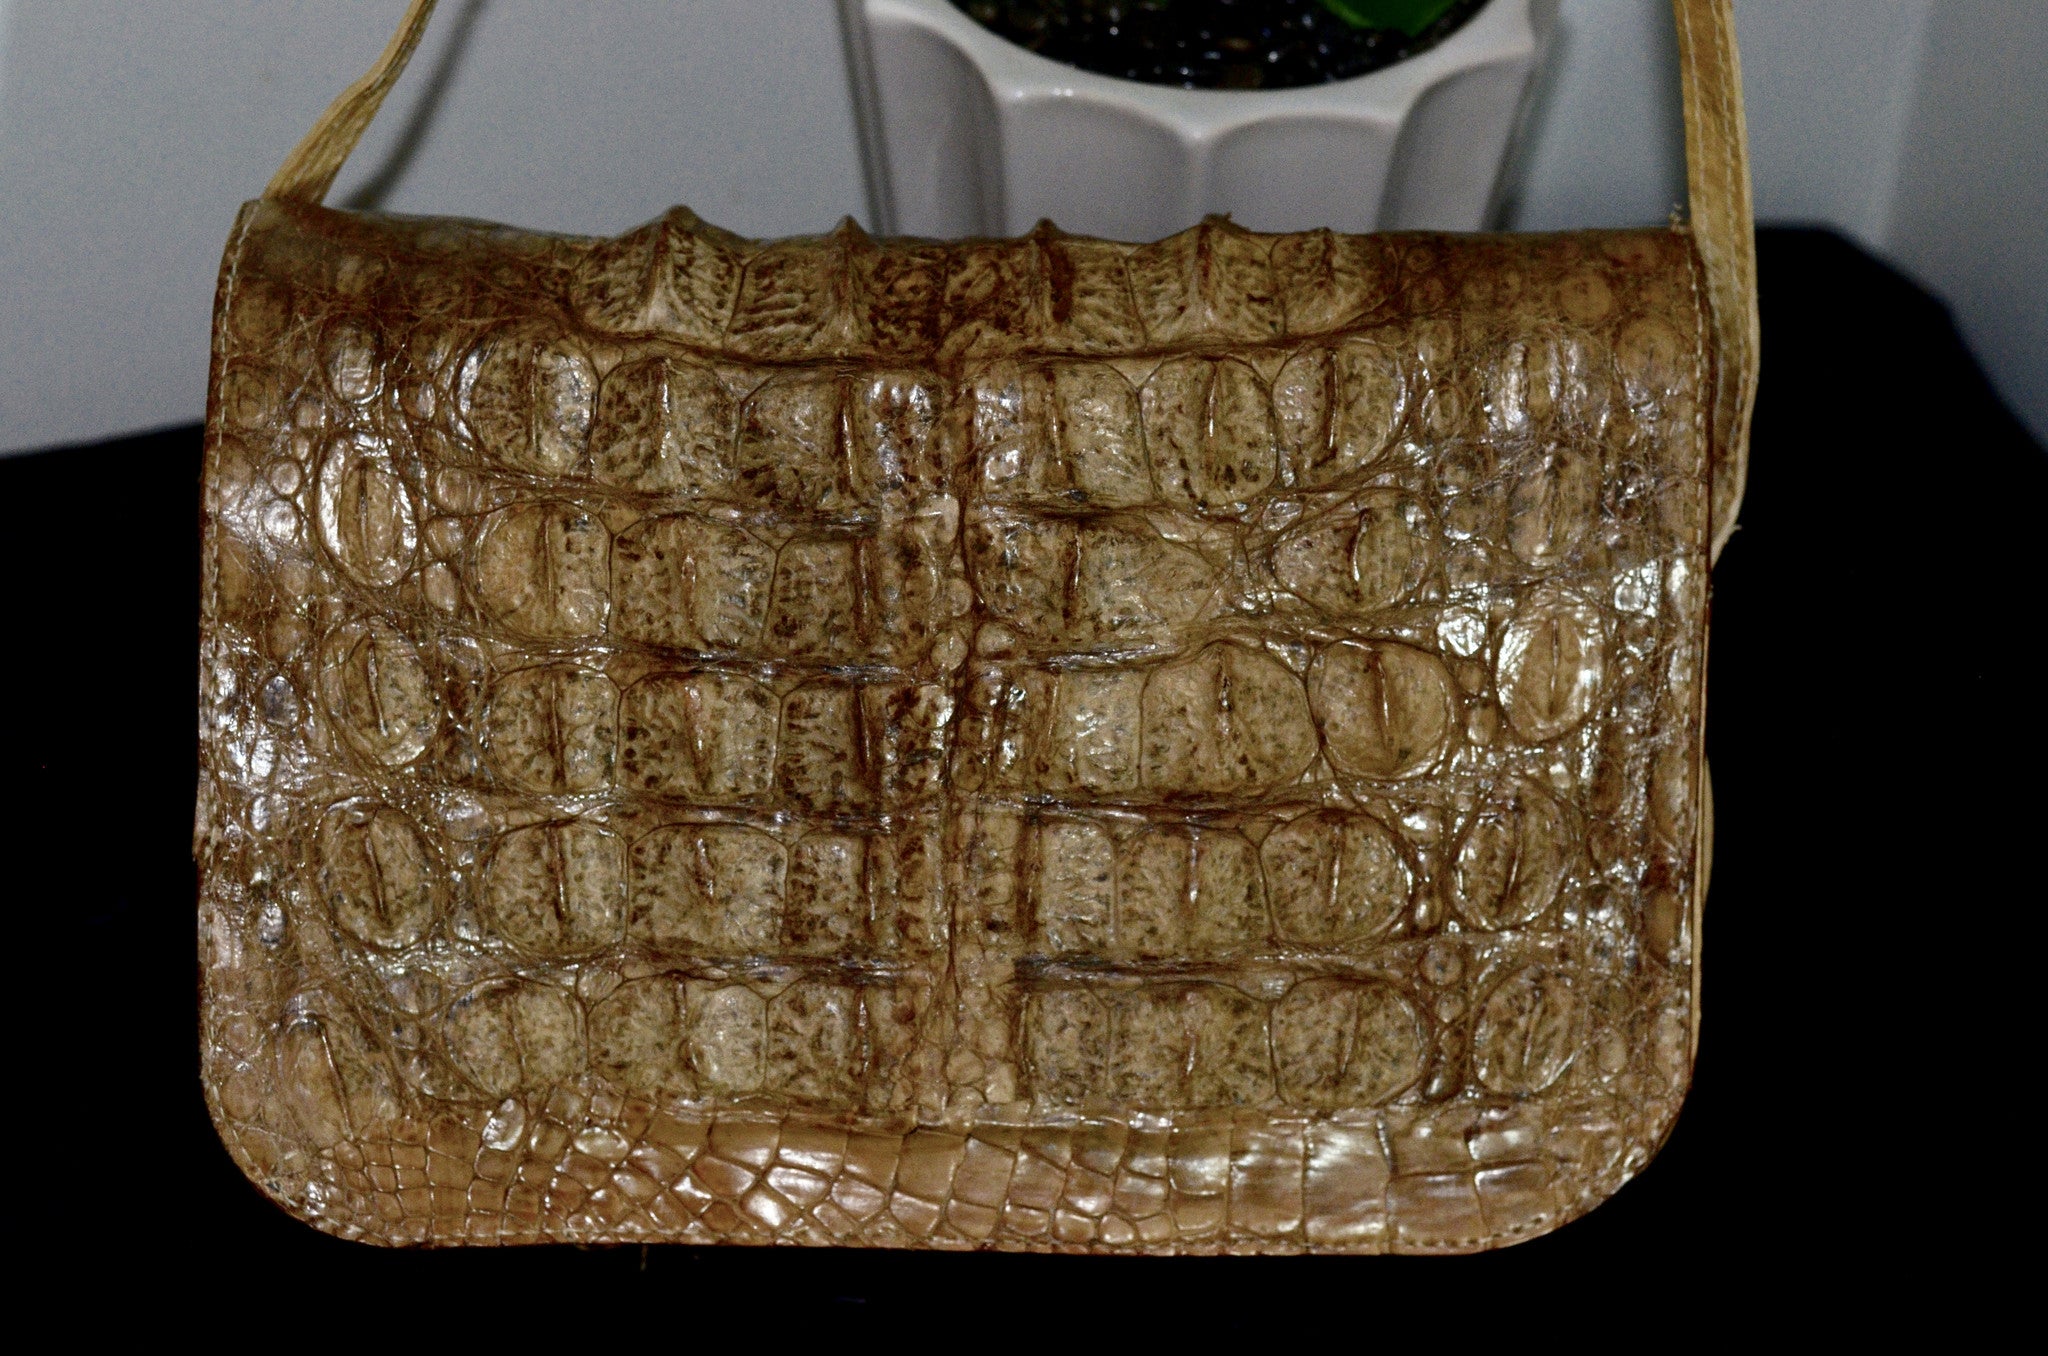 Sold at Auction: Coulter & Wastie: A Brown Crocodile Handbag, c.1950s,